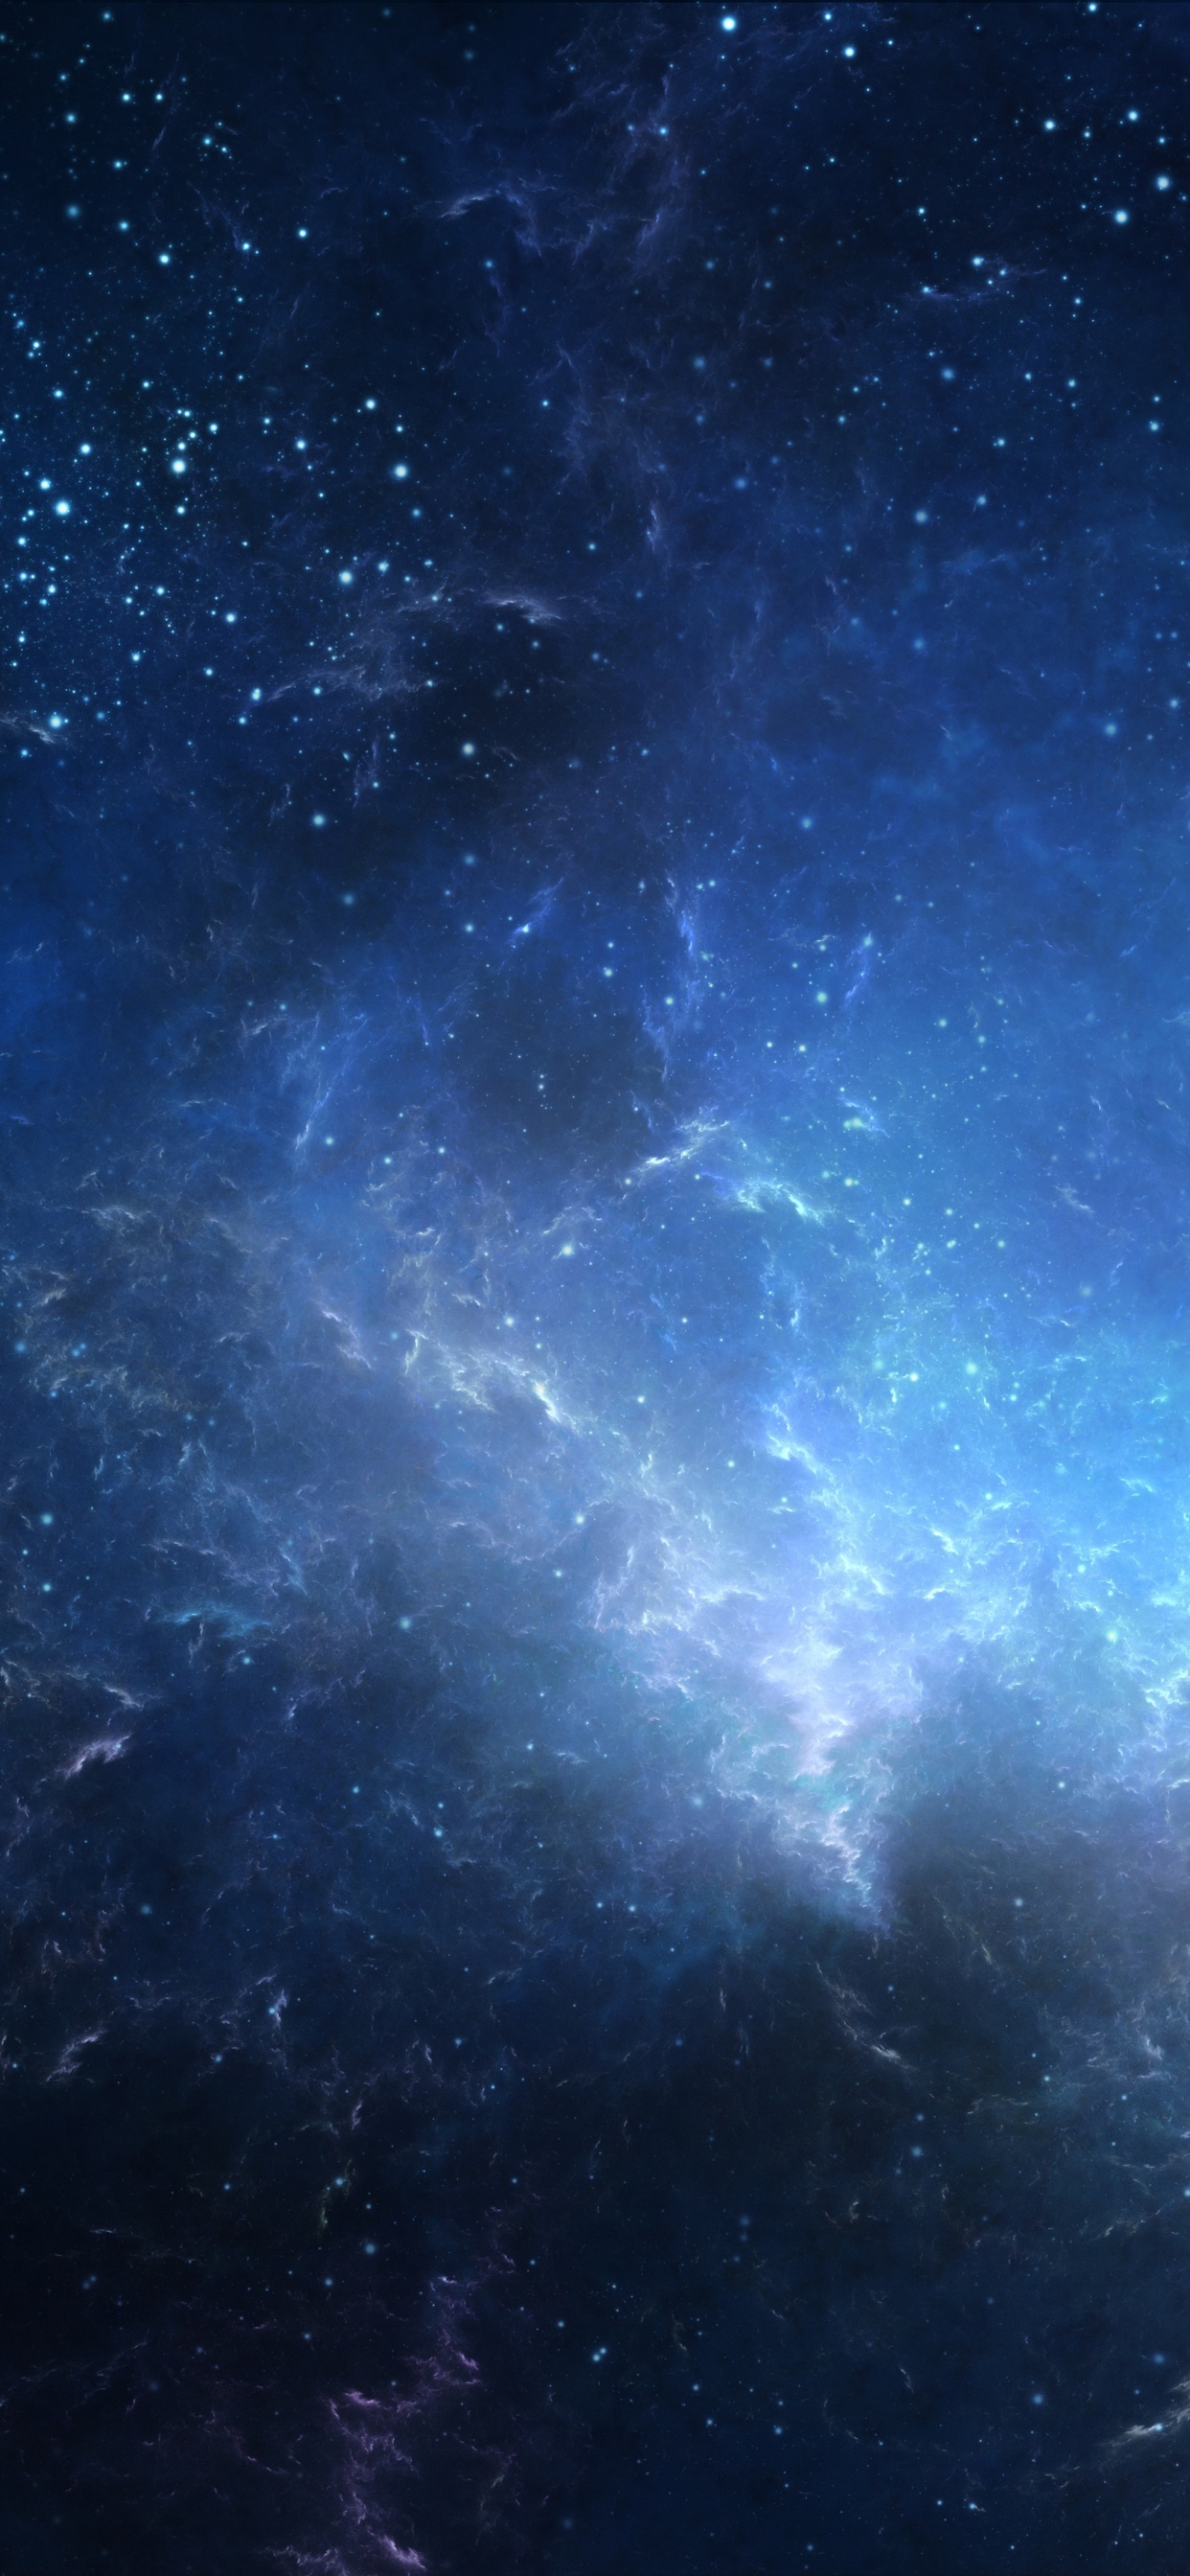 Blue and White Starry Night. Wallpaper in 1242x2688 Resolution